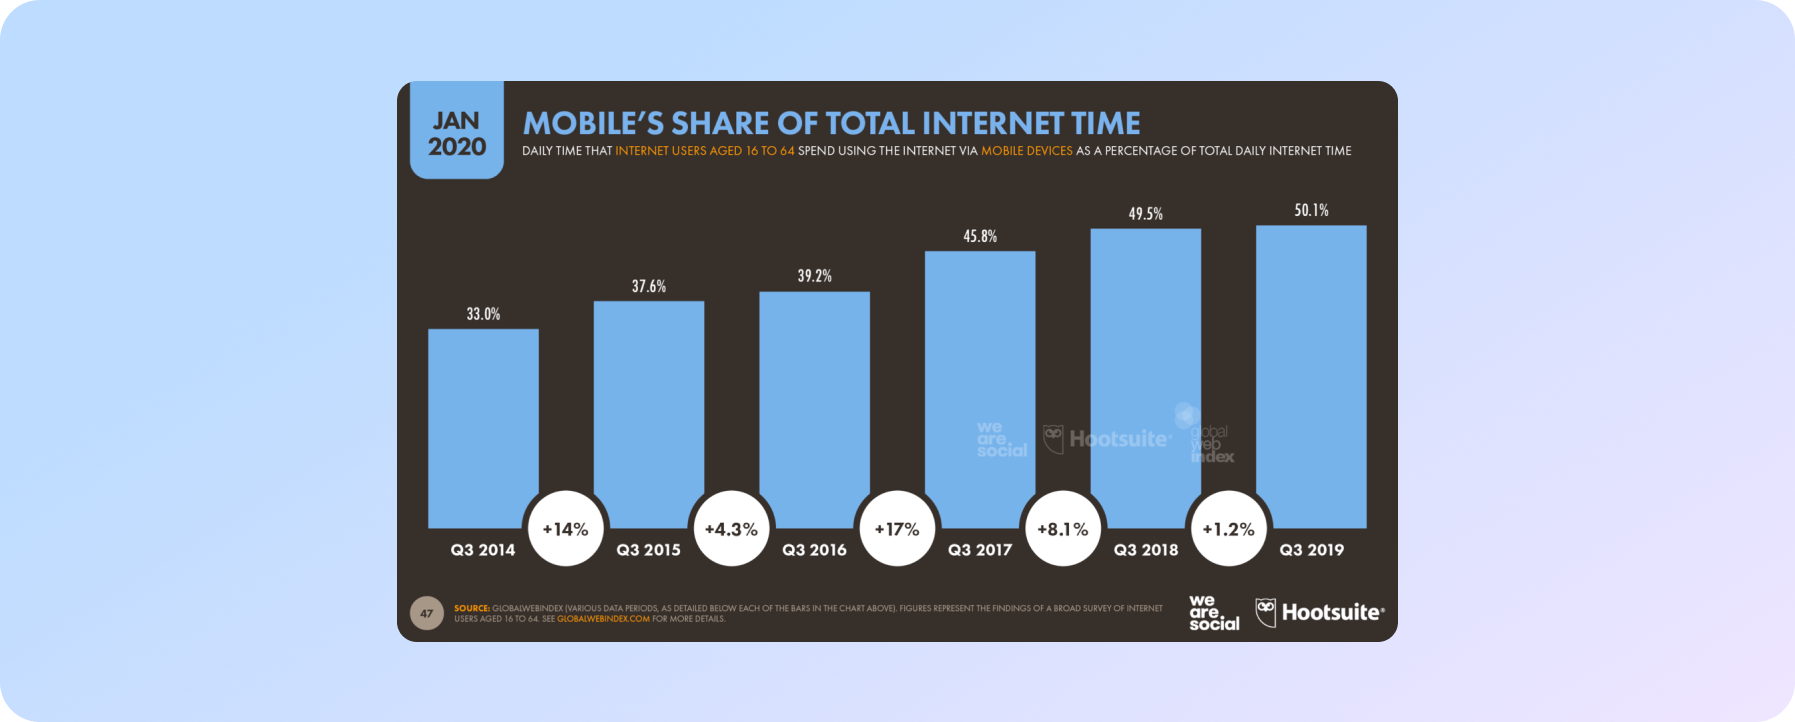 Mobile - a trend that should be taken into account in contextual advertising